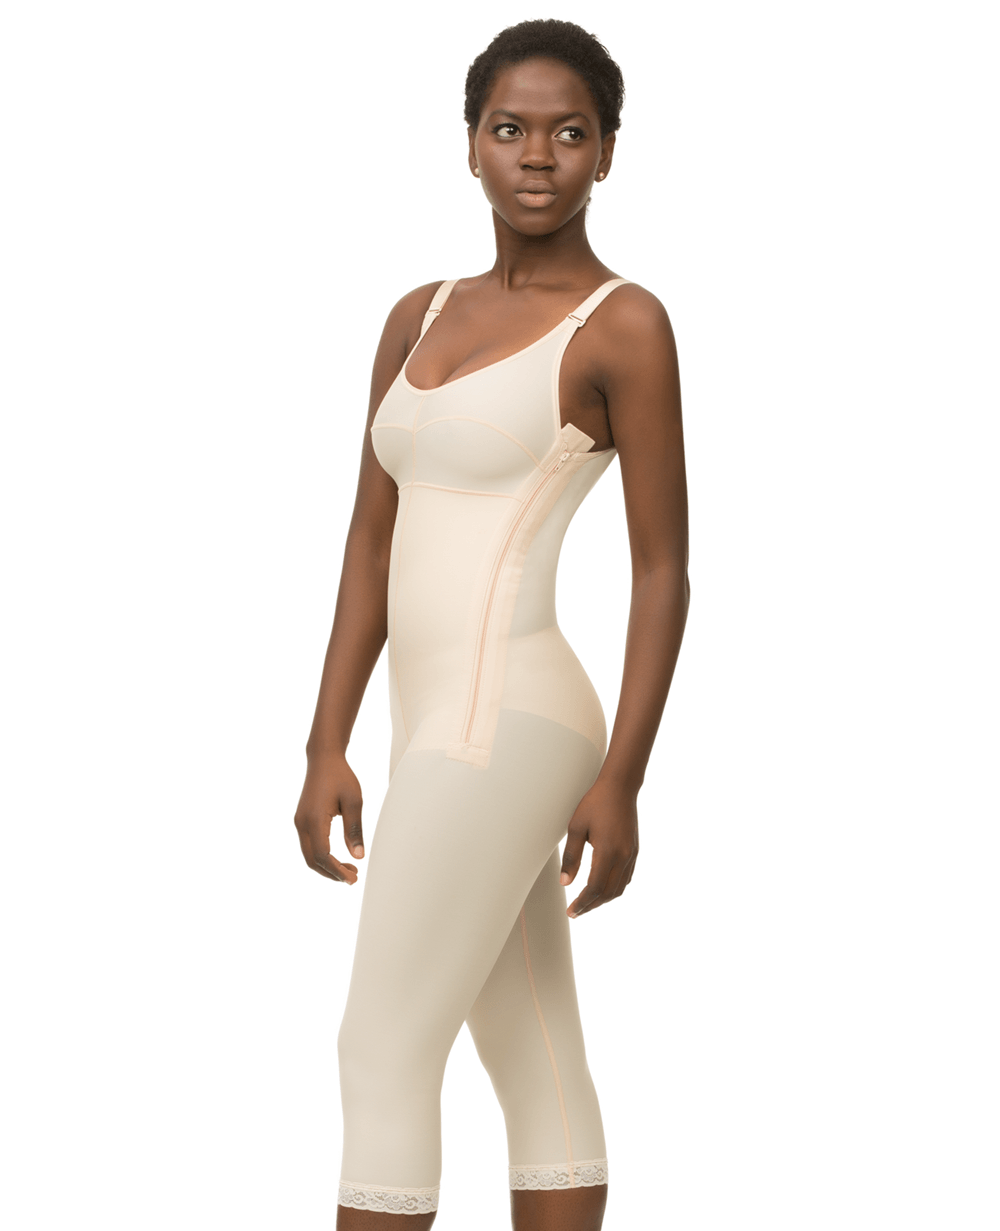 Below the knee full body shaper with vest incorporated